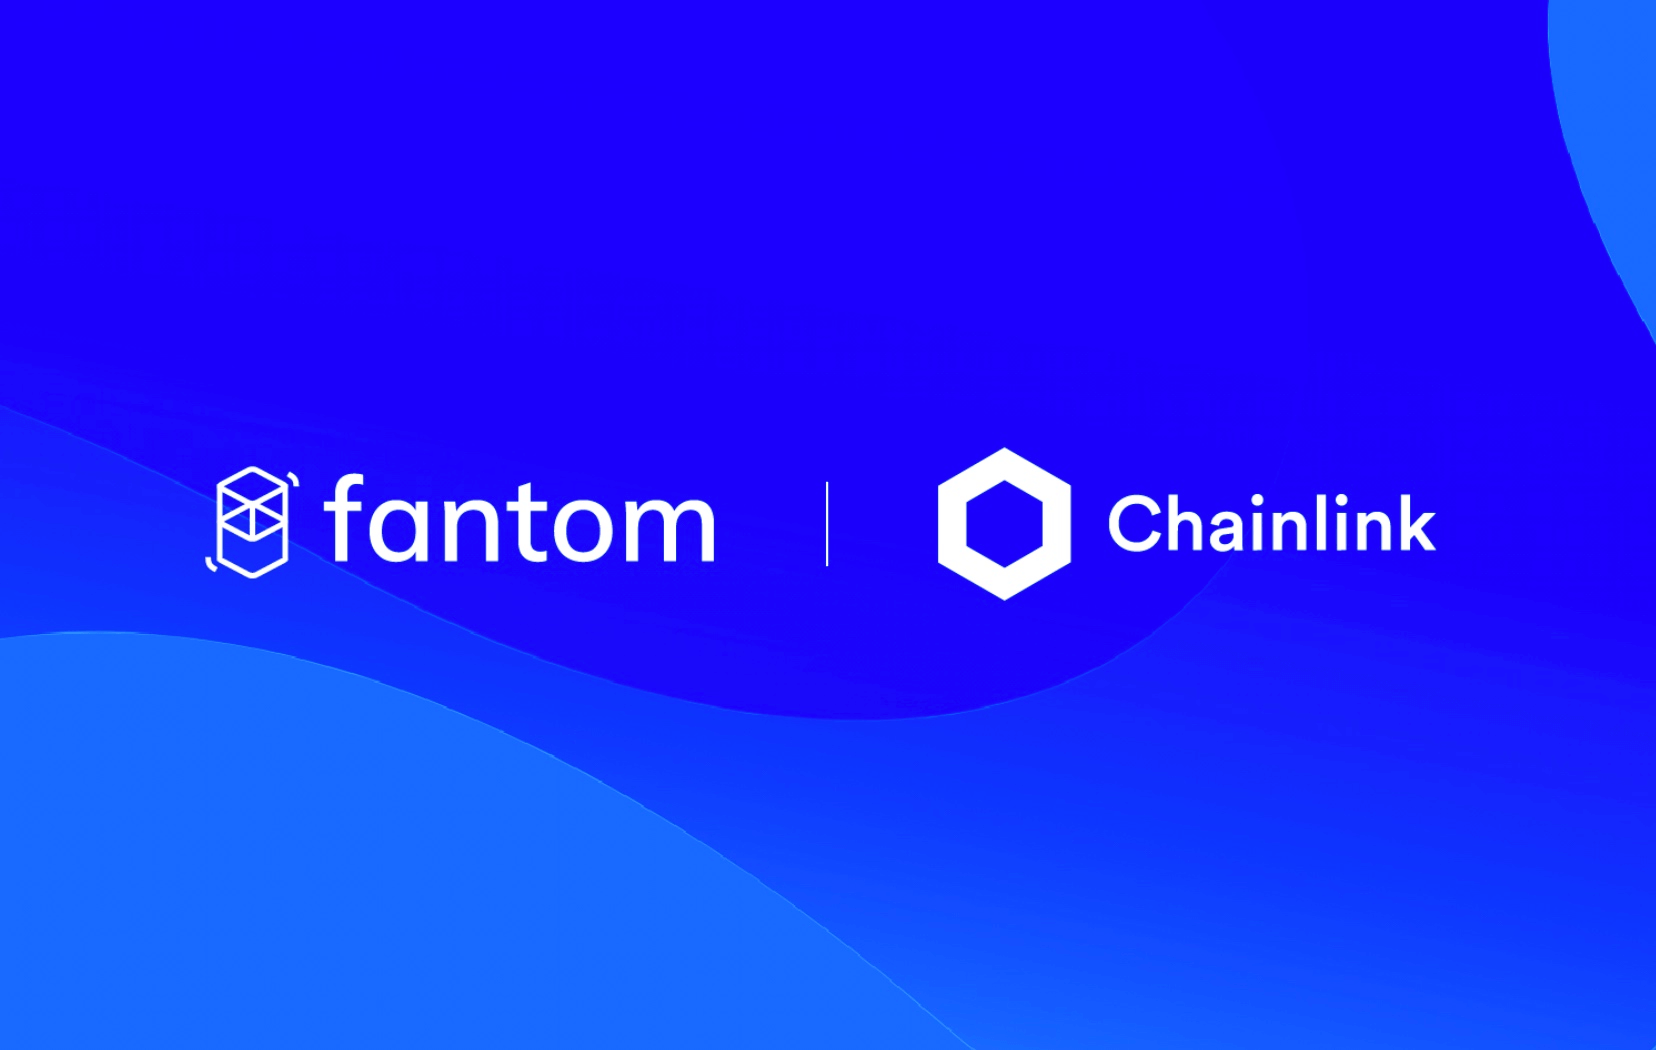 Fantom ($FTM) Partners With Chainlink ($LINK) to Give Developers On-chain Randomness